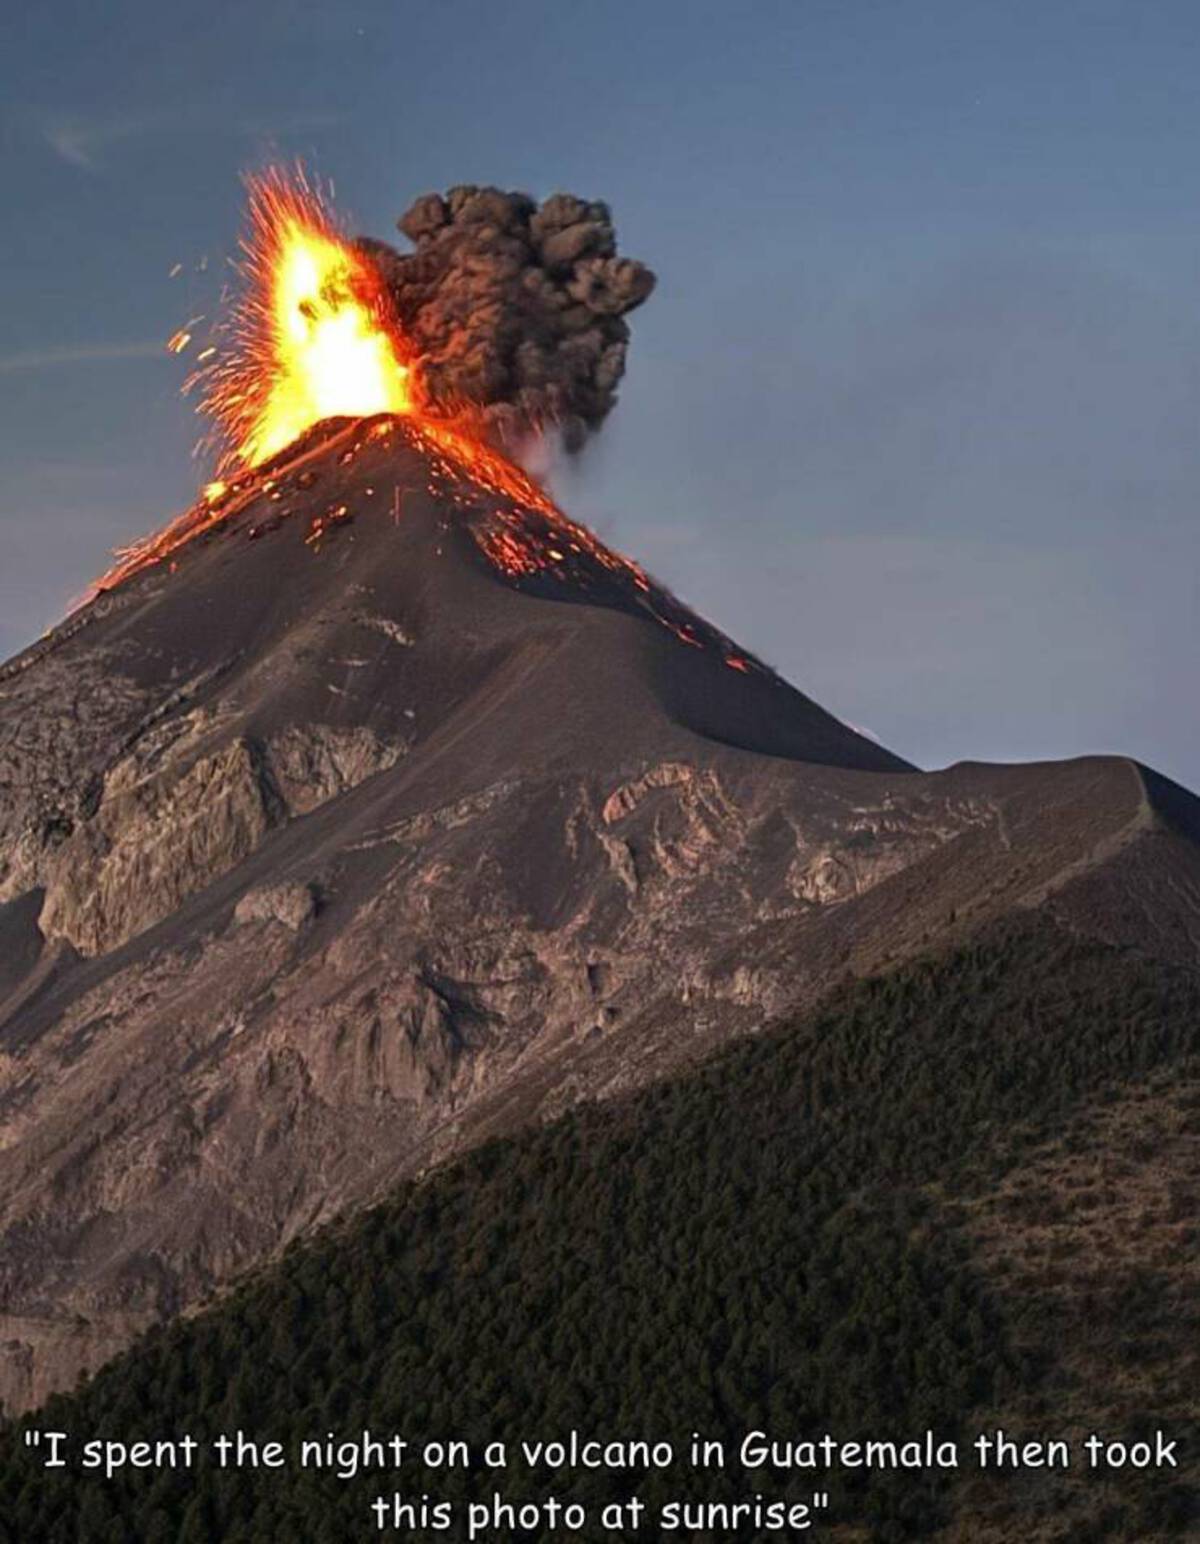 stratovolcano - "I spent the night on a volcano in Guatemala then took this photo at sunrise"